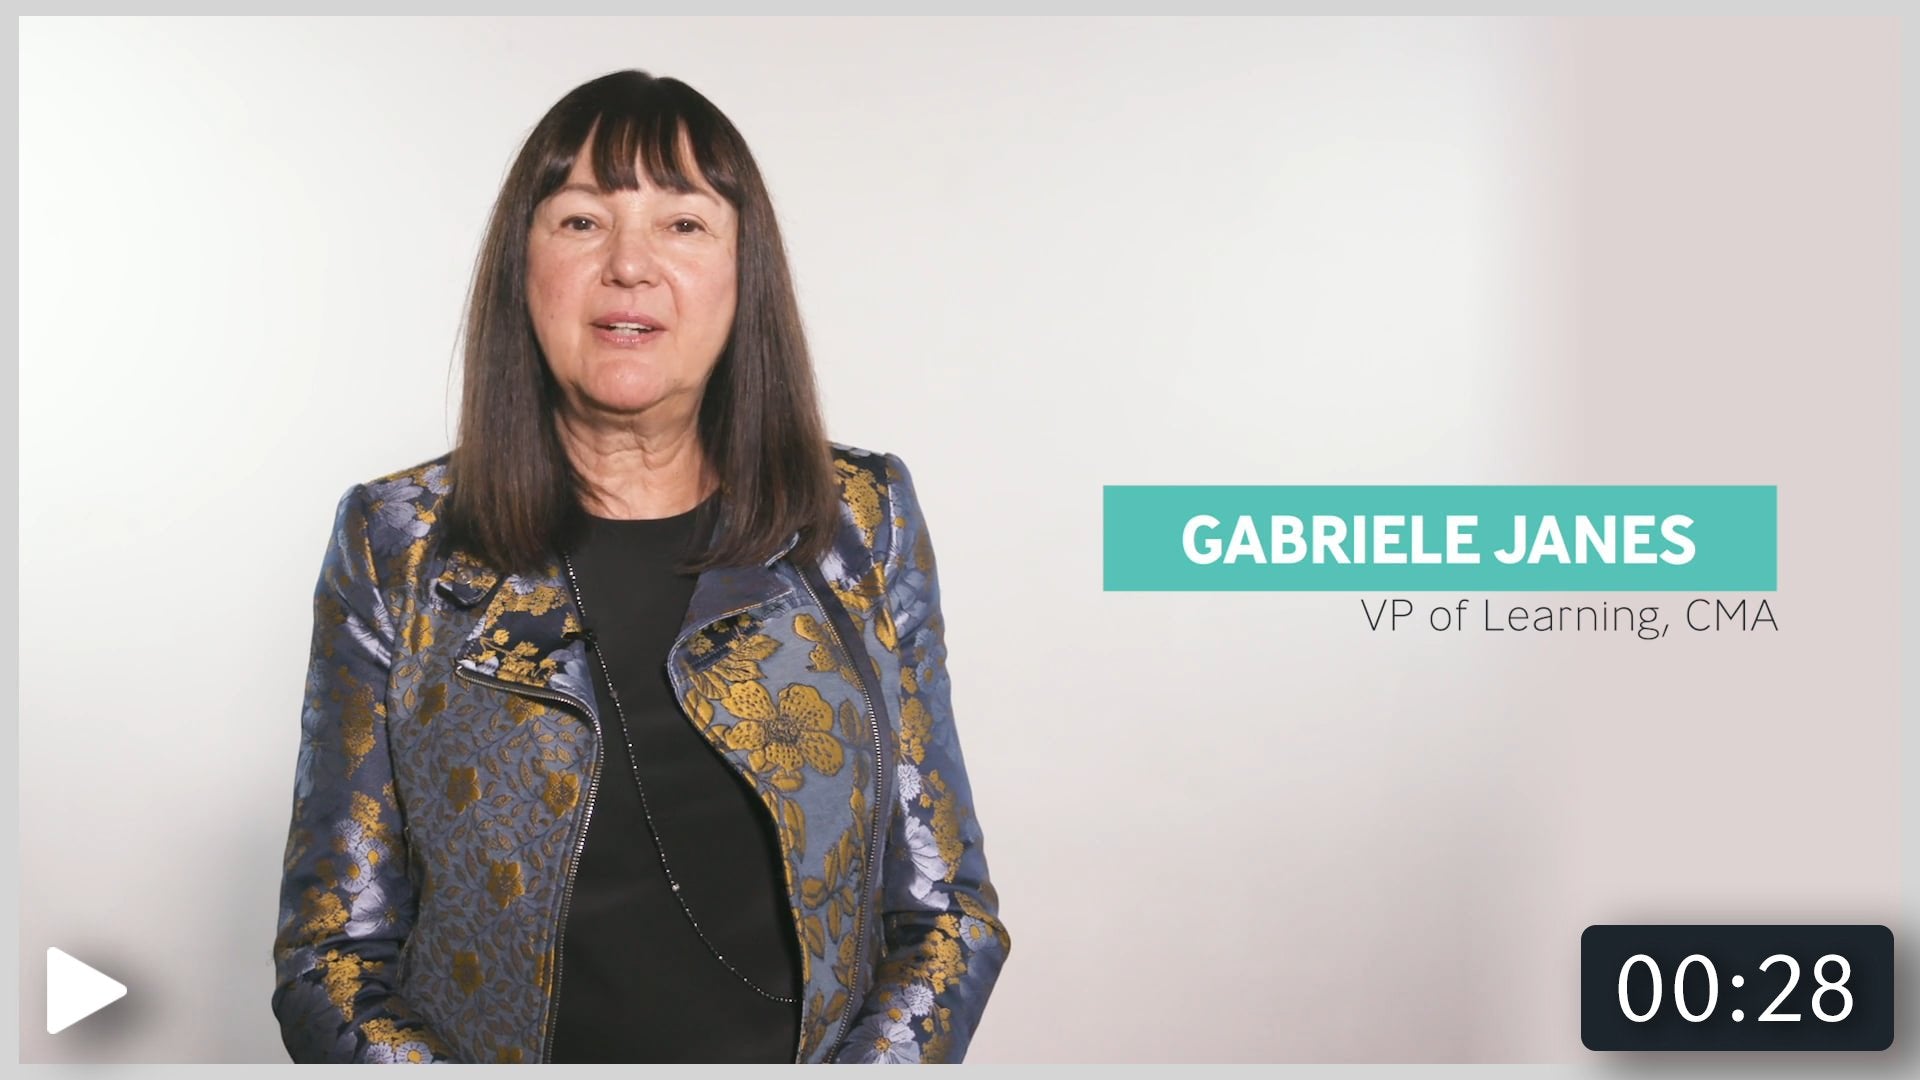 Meet Gabriele Janes who discusses the importance of Professional Development